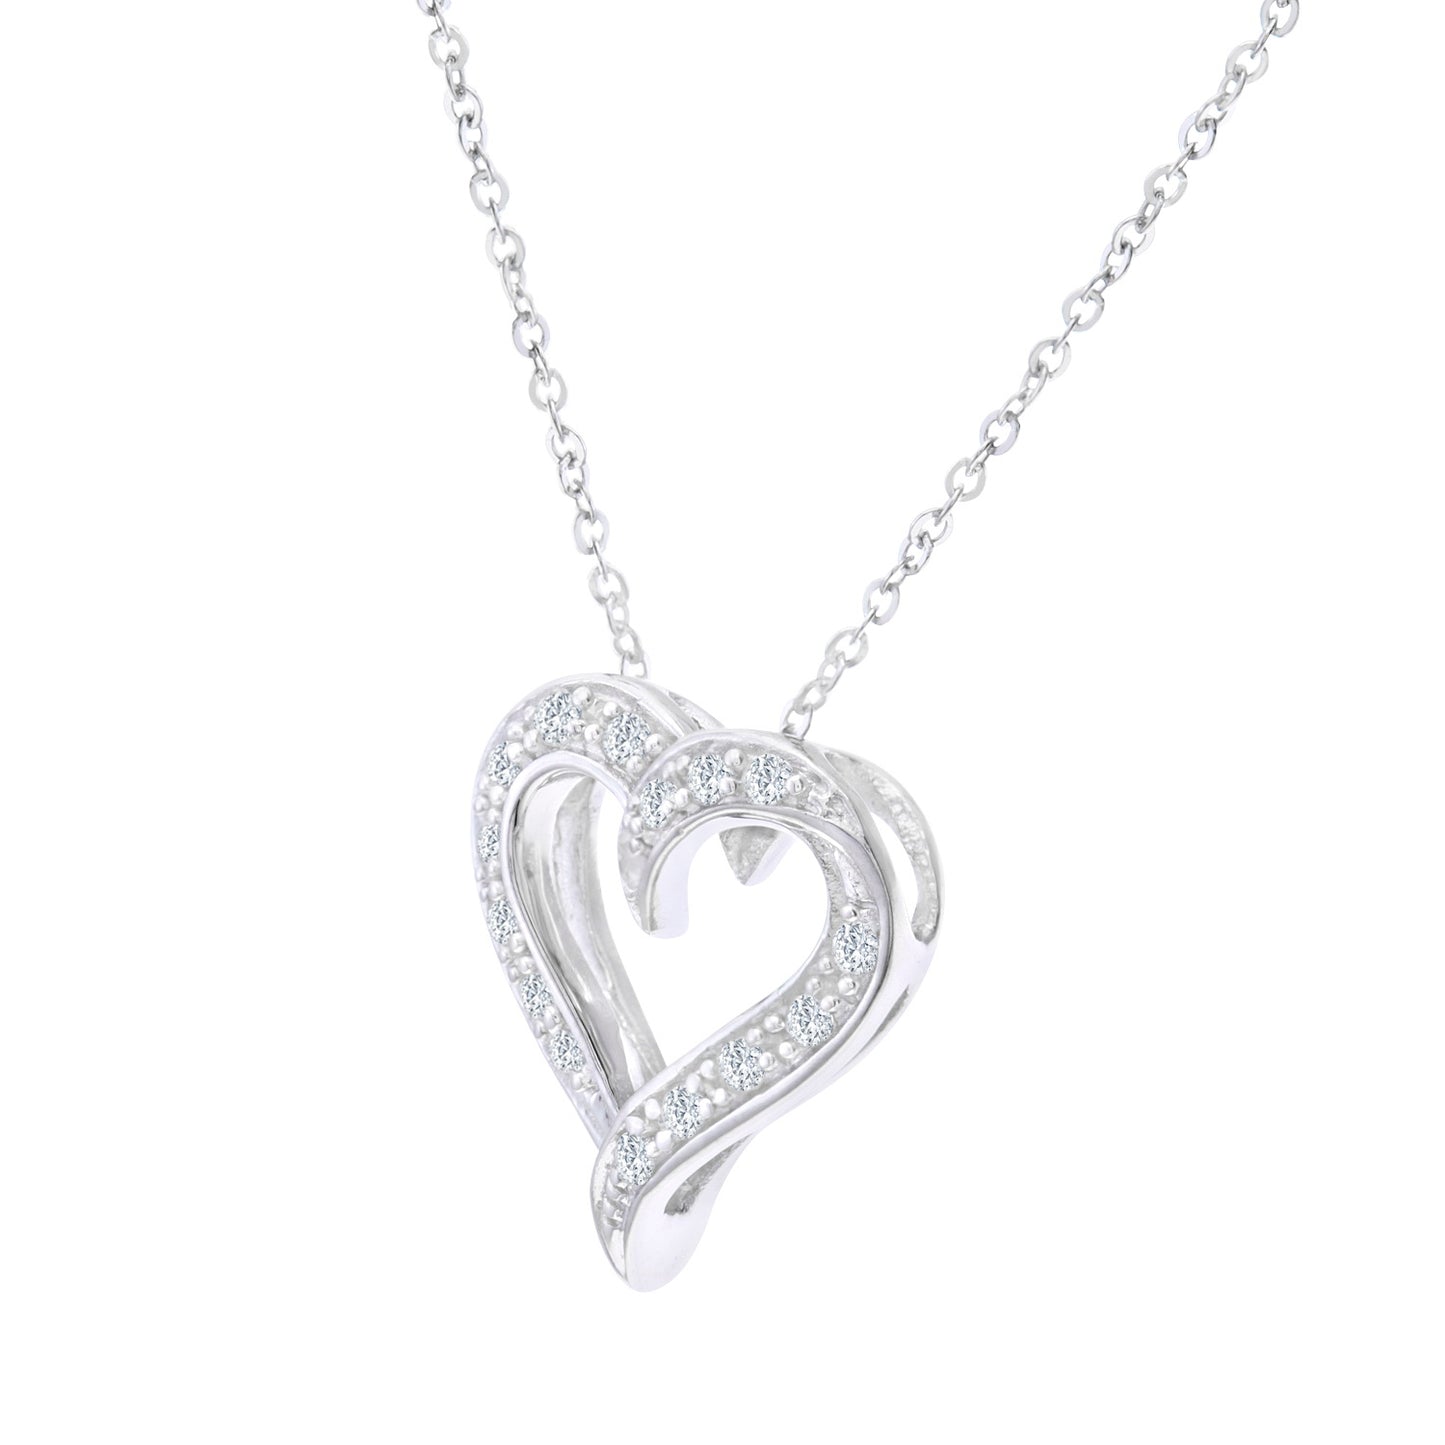 9ct White Gold  Round 10pts Diamond Heart Pendant Necklace 18 inch - PP0AXL2126W